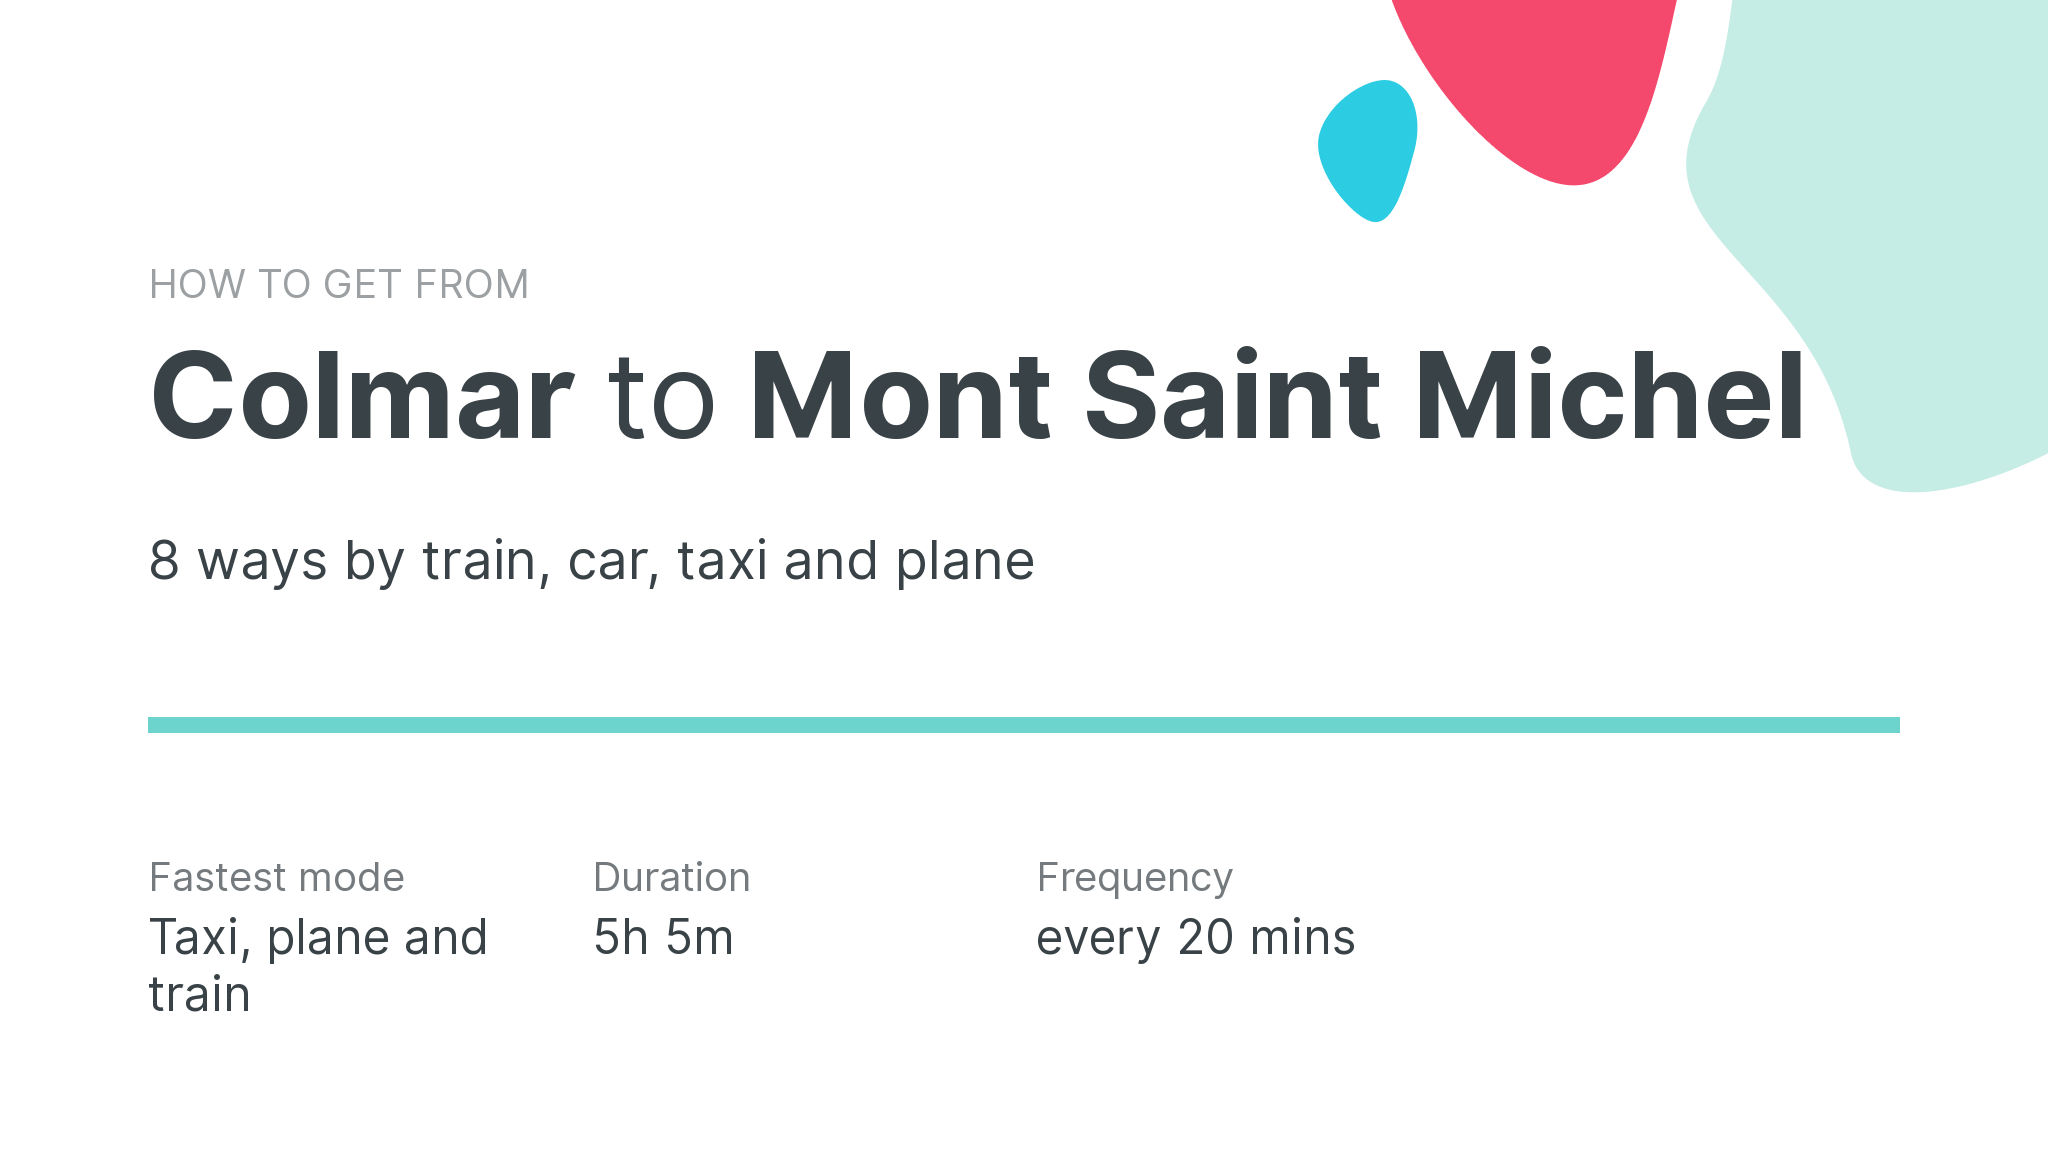 How do I get from Colmar to Mont Saint Michel